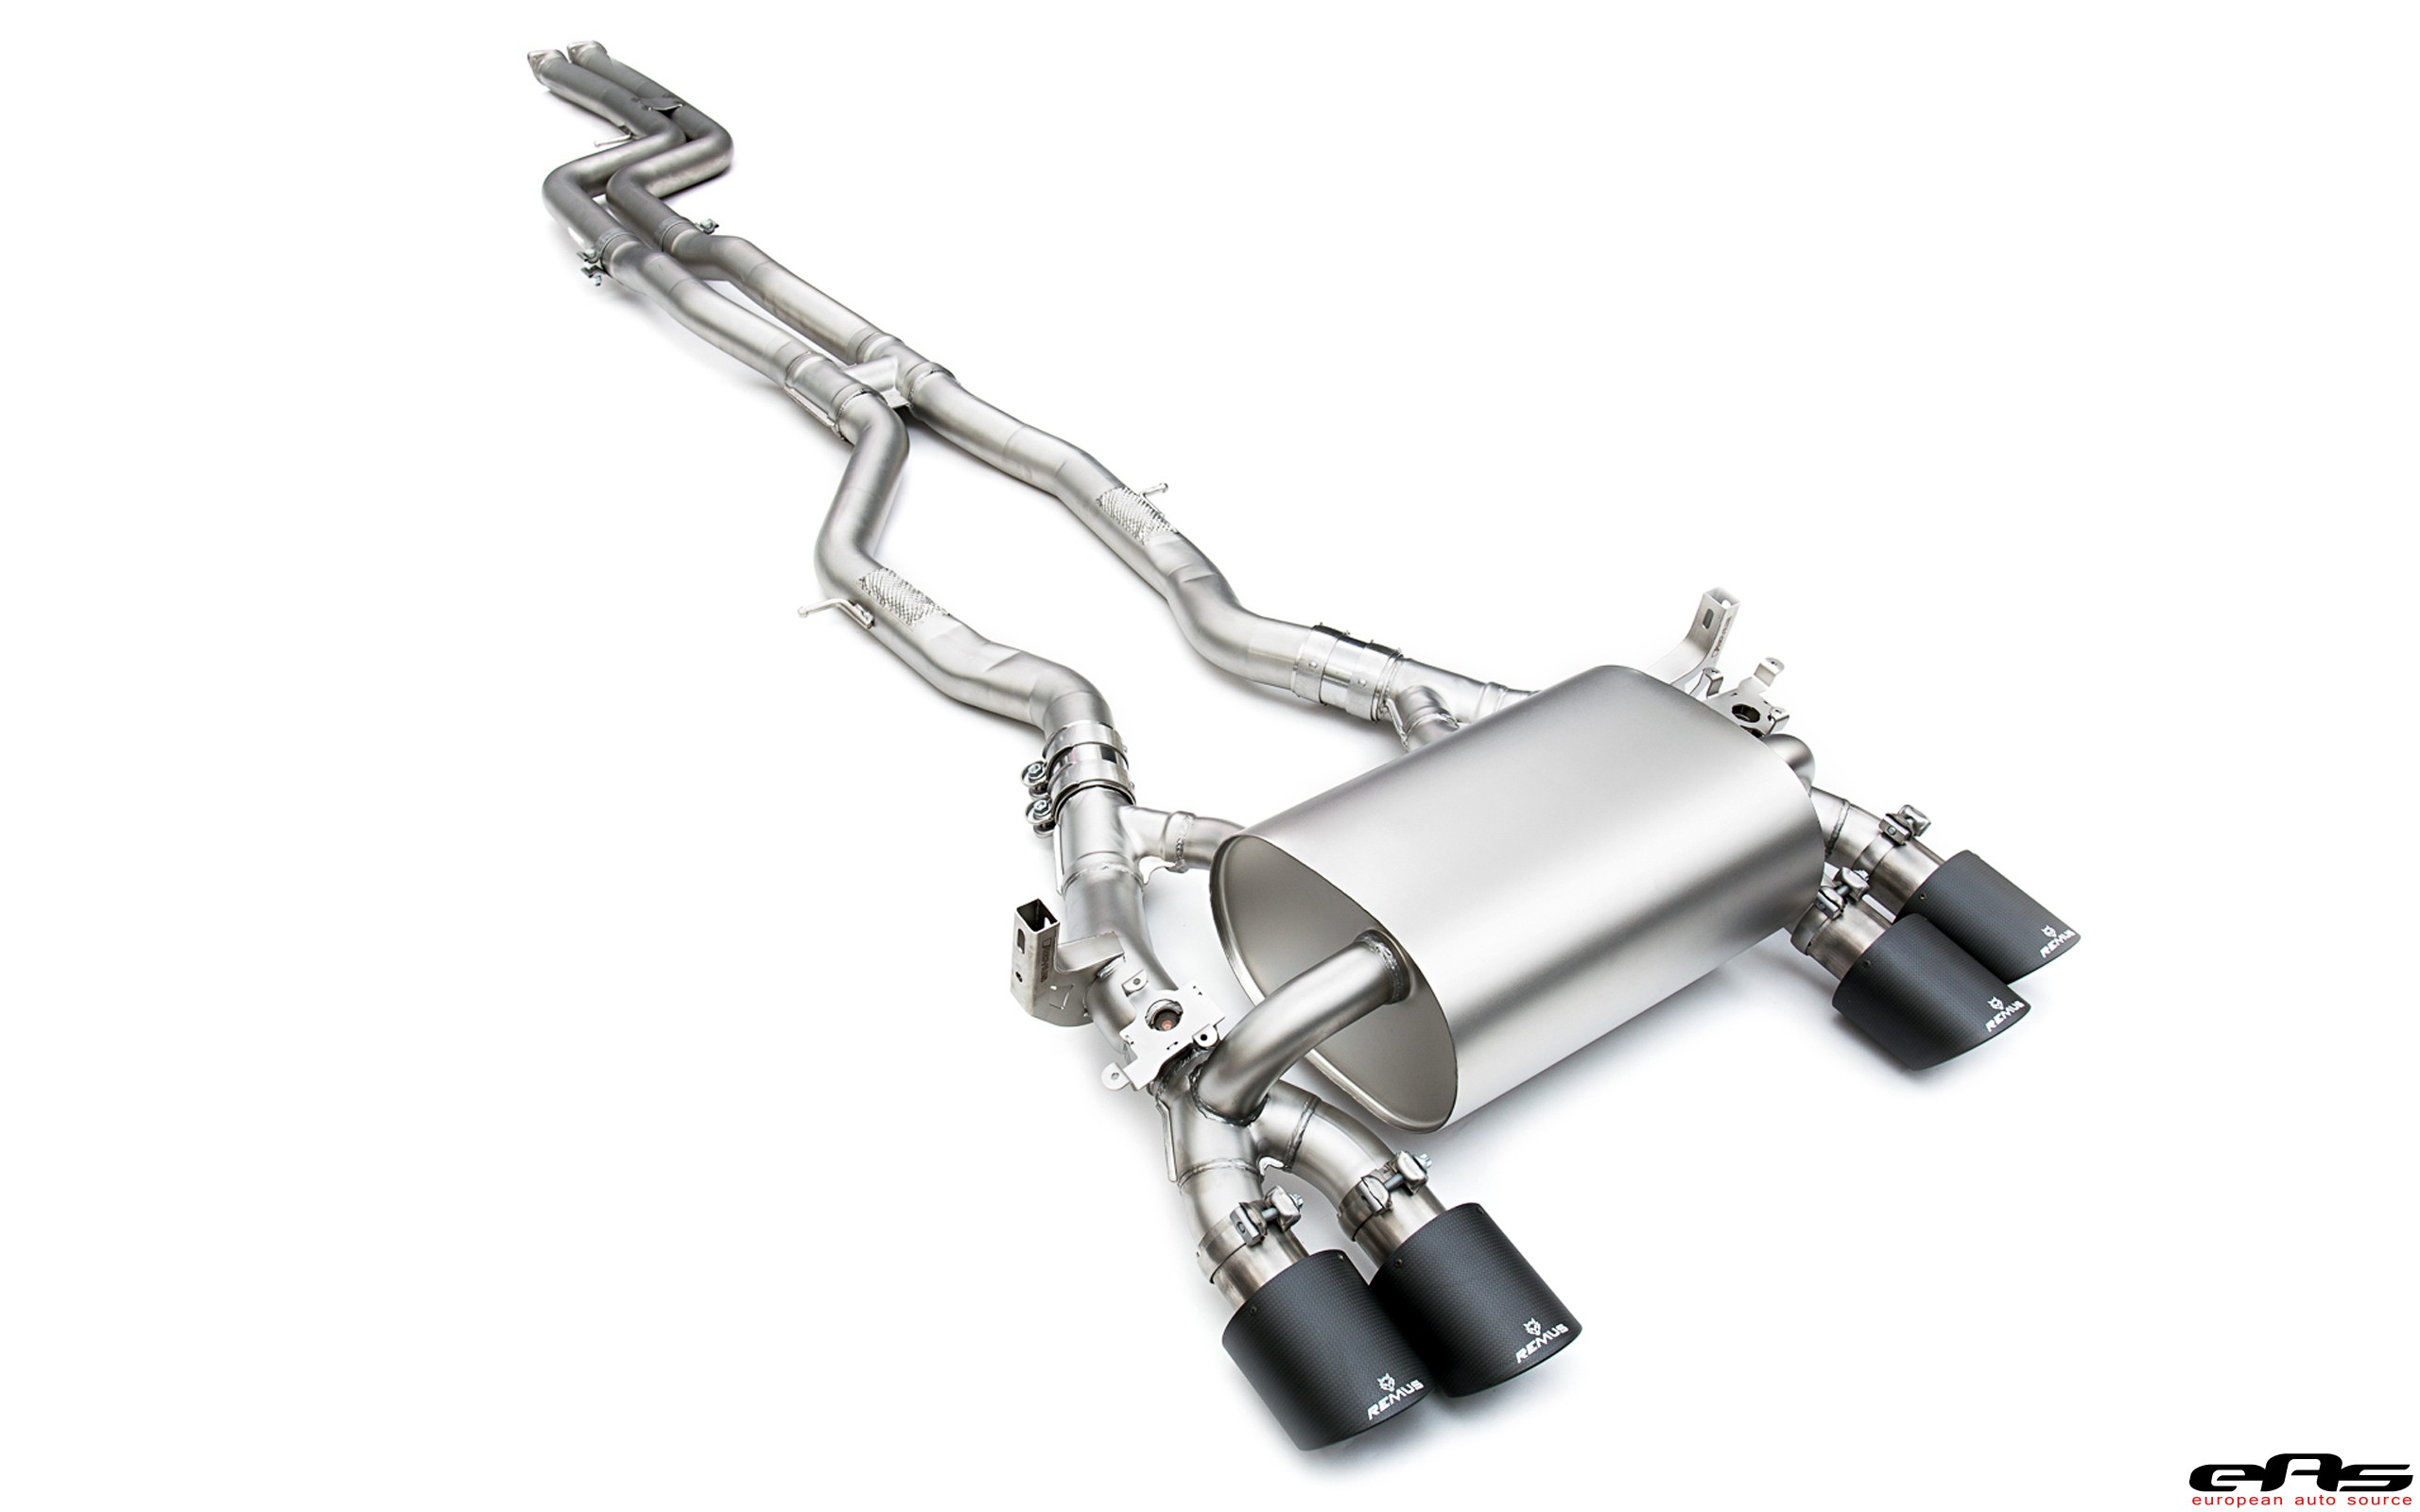 Bmw remus exhaust review #7